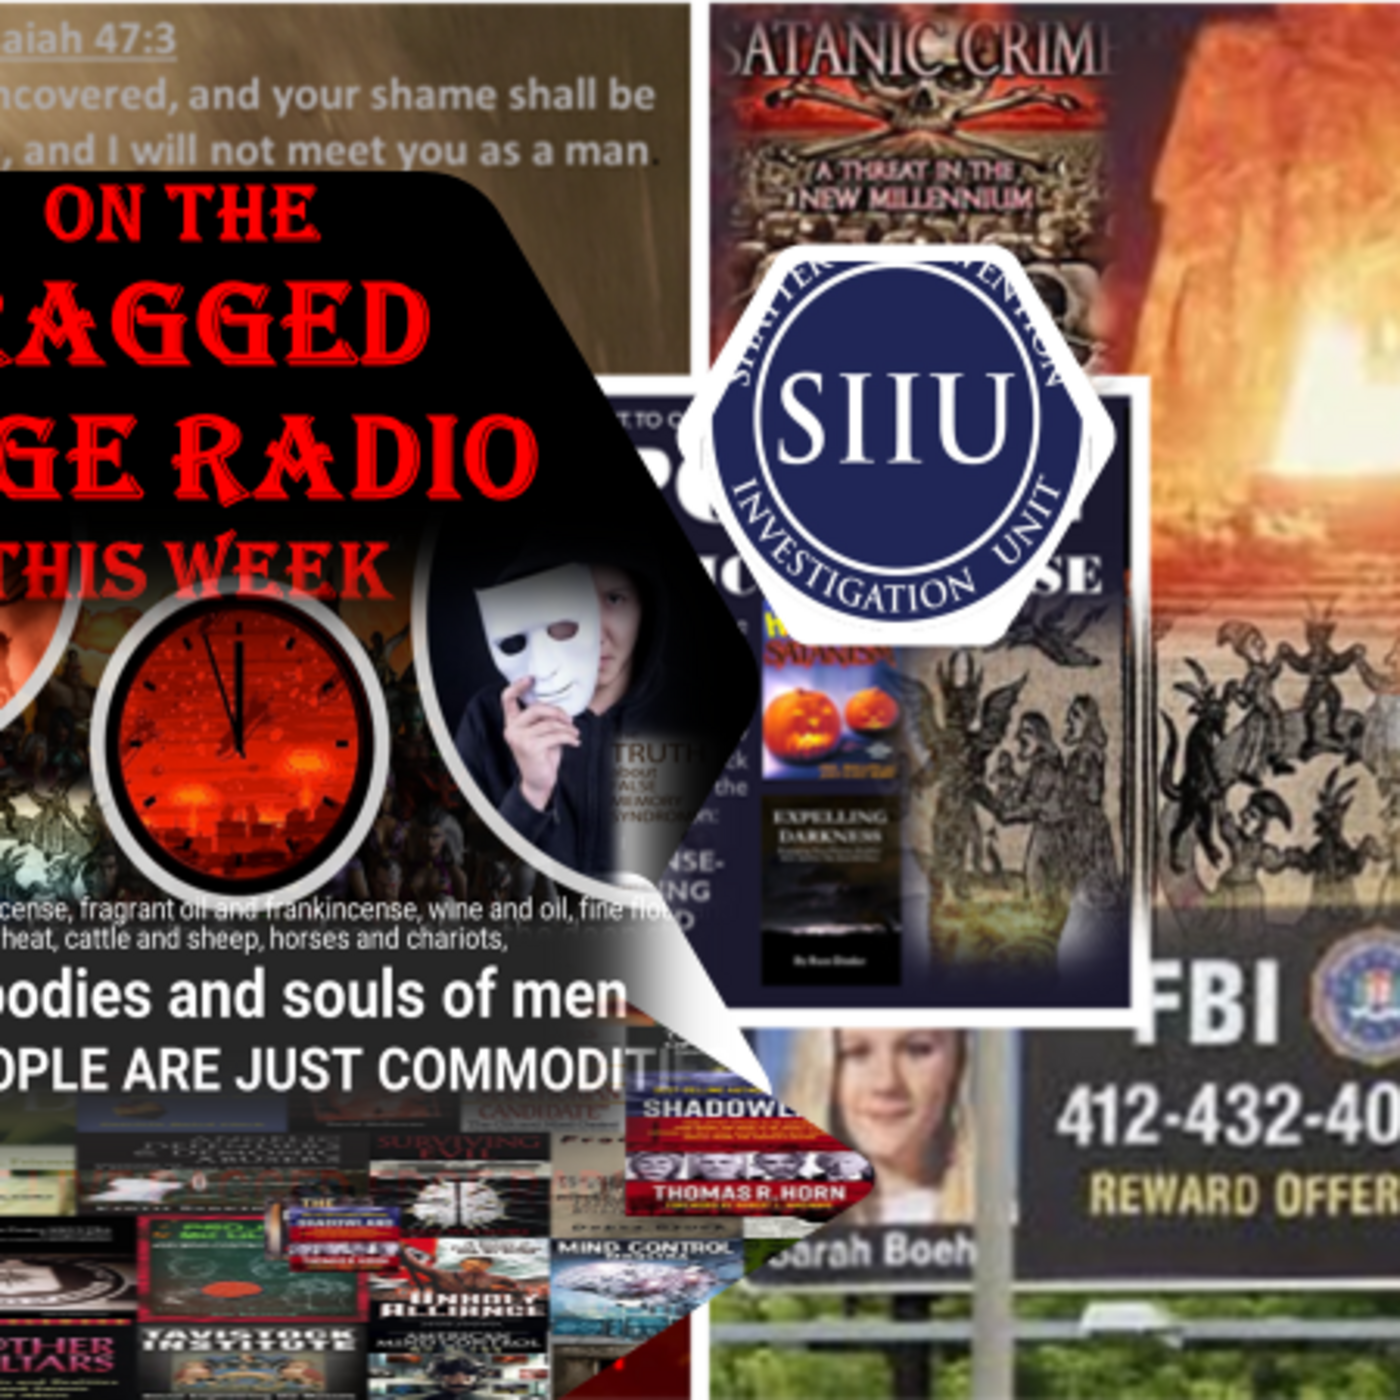 Episode 1752: SRA HUMANITY AT THE GATES OF HADES PART 45 E Resurrection power...